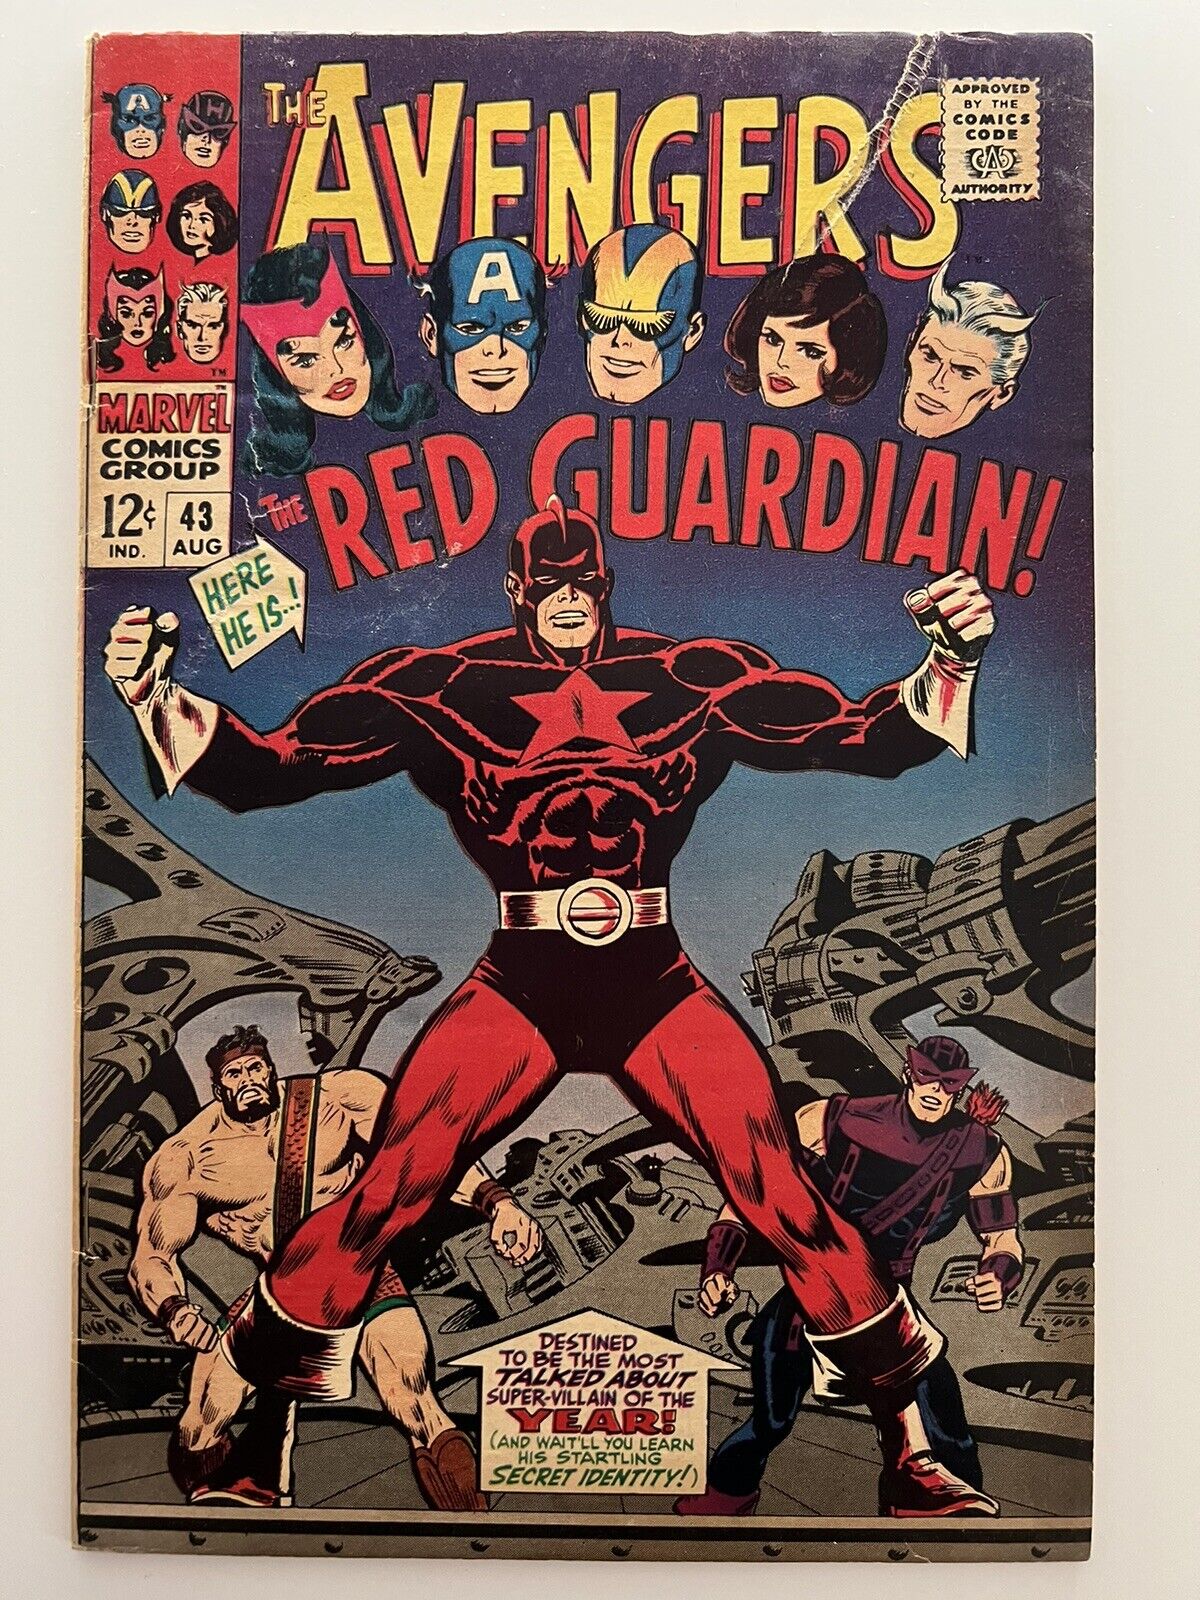 The Avengers #43 Marvel Comics 1967  1st Appearance Red Guardian (VG-/VG)